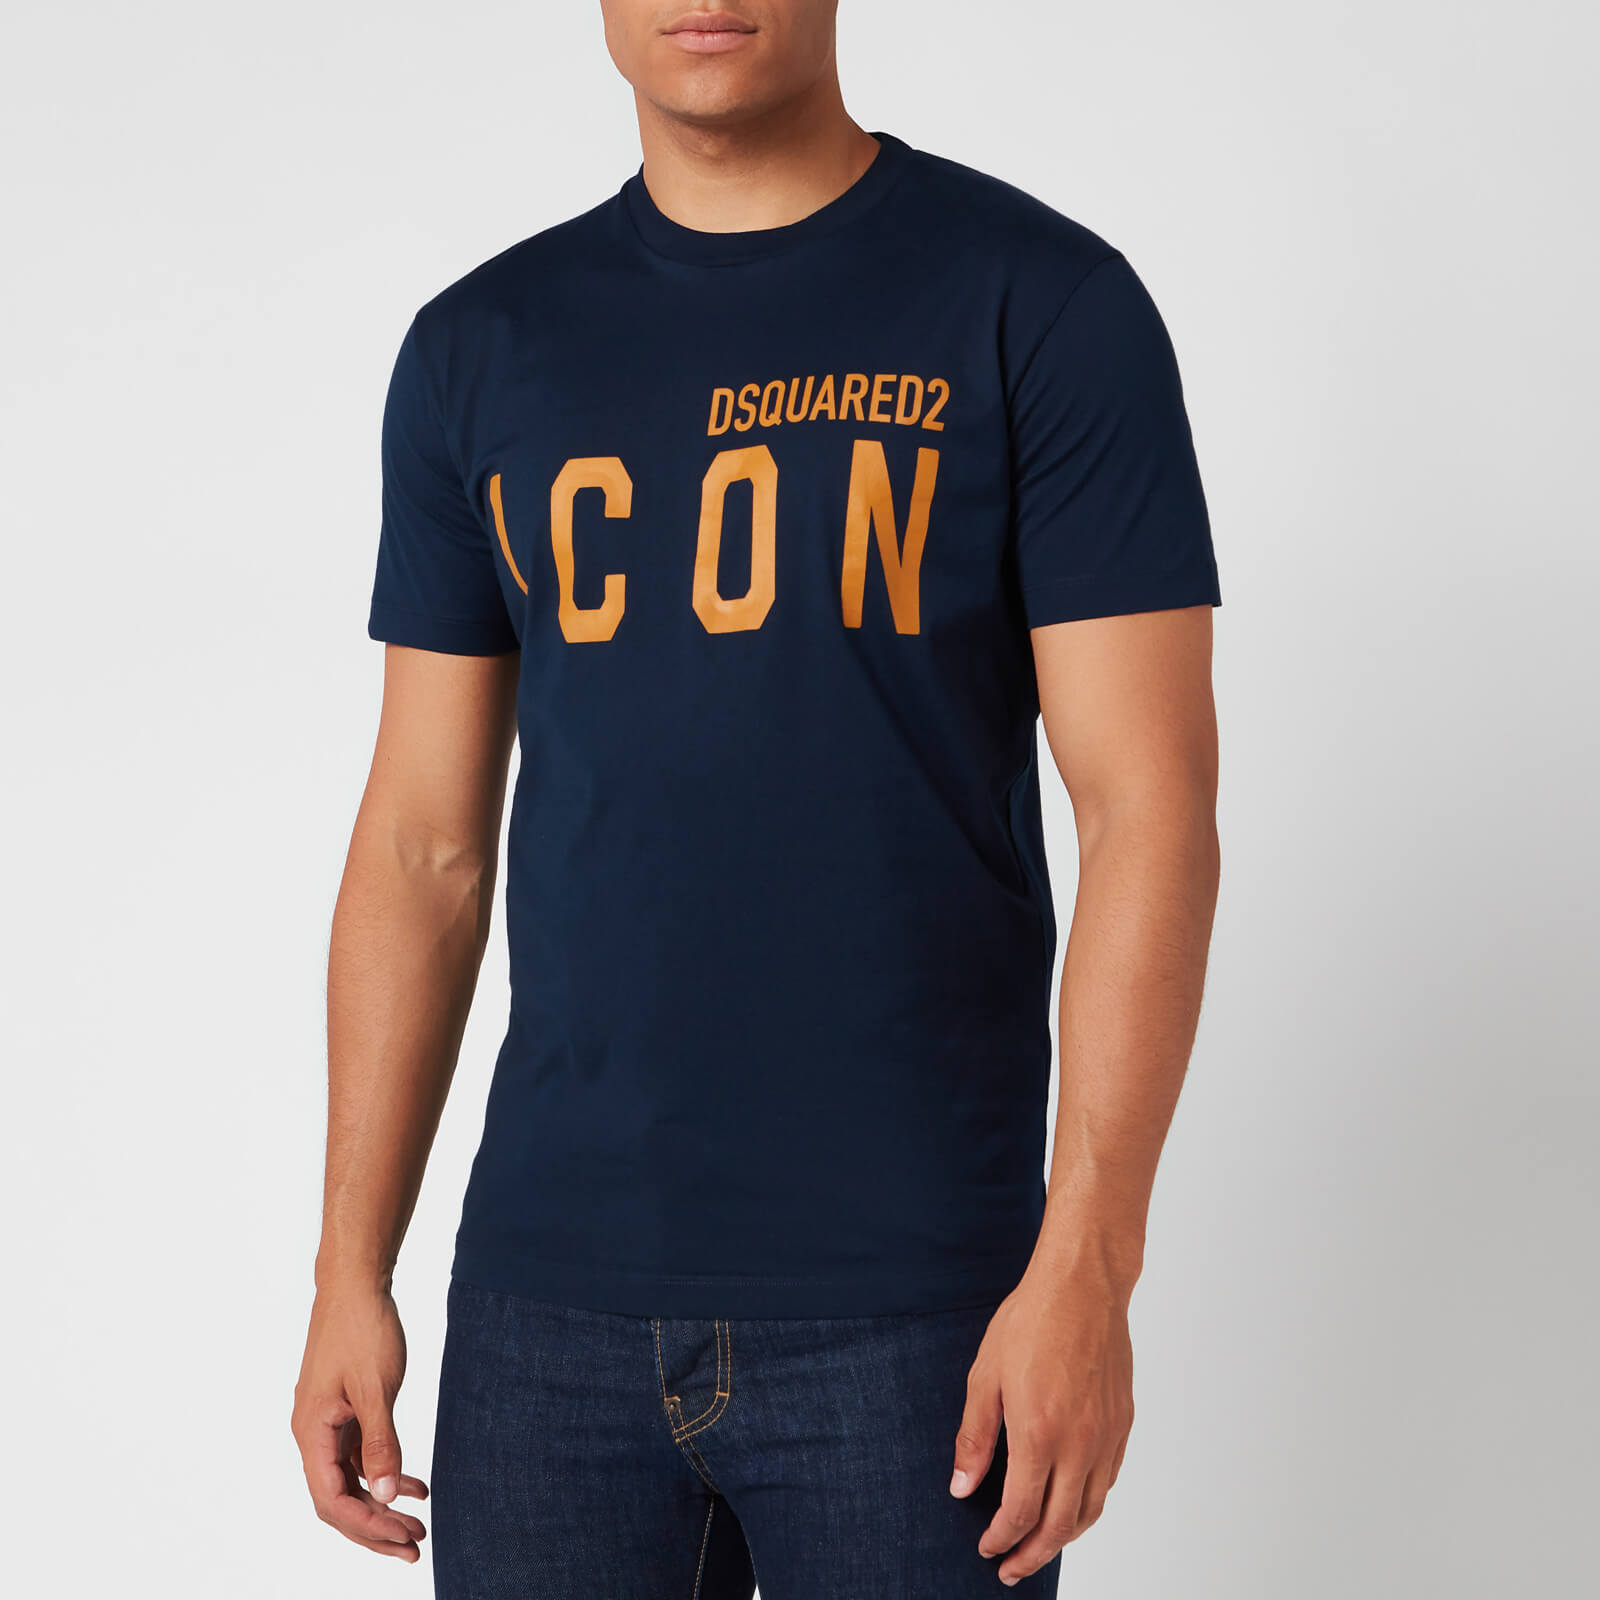 dsquared2 navy t shirt